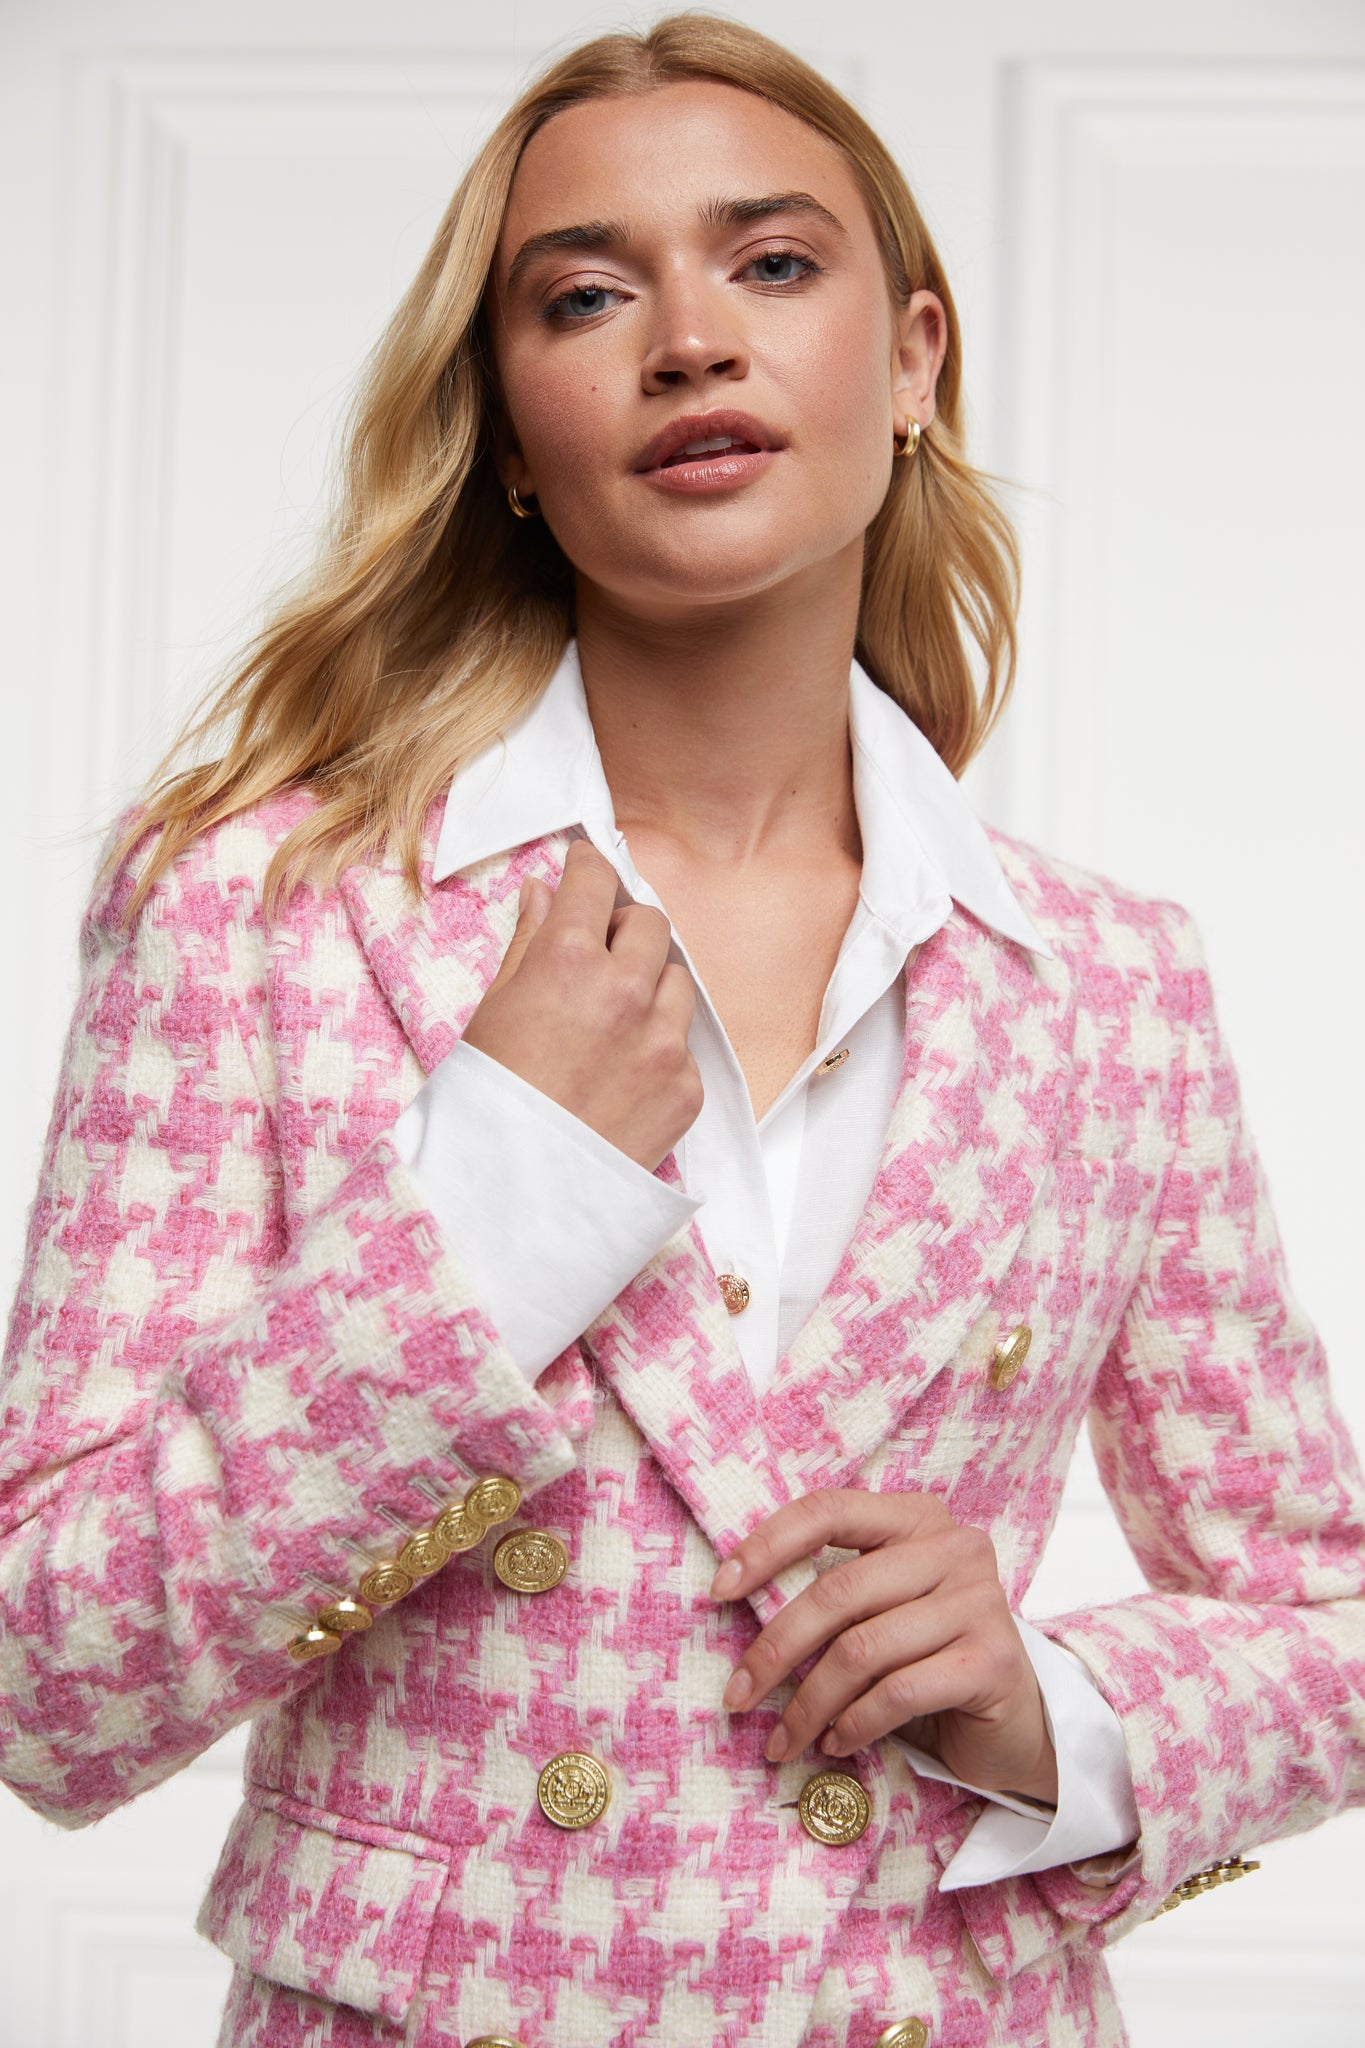 pink and white large scale houndstooth fitted blazer double breasted style but with only single button fastening to the one central button for more form fitted tailored look finished with two pockets at hips and gold button details on front and cuffs